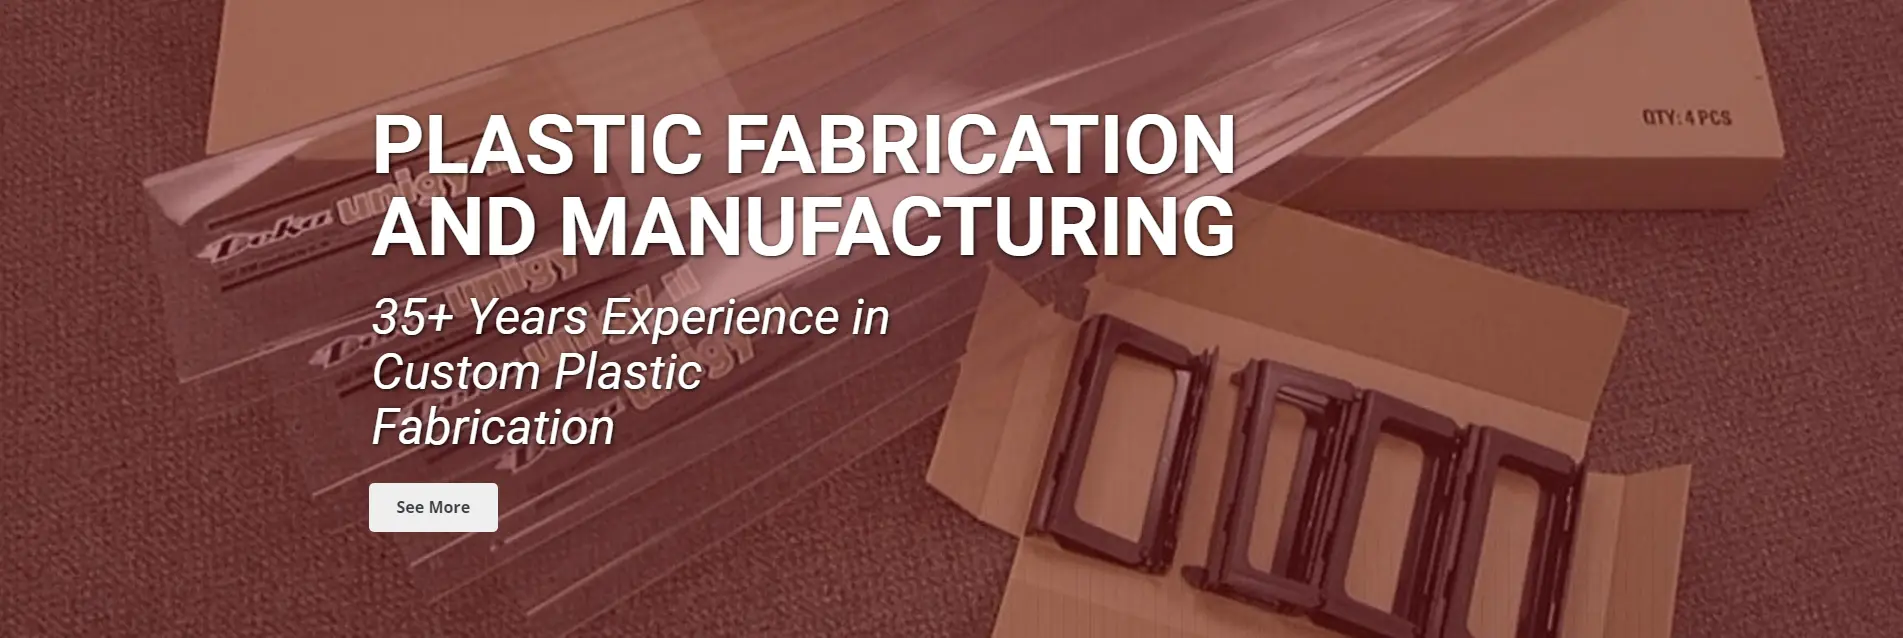 Plastic Fabrication and Manufacturing